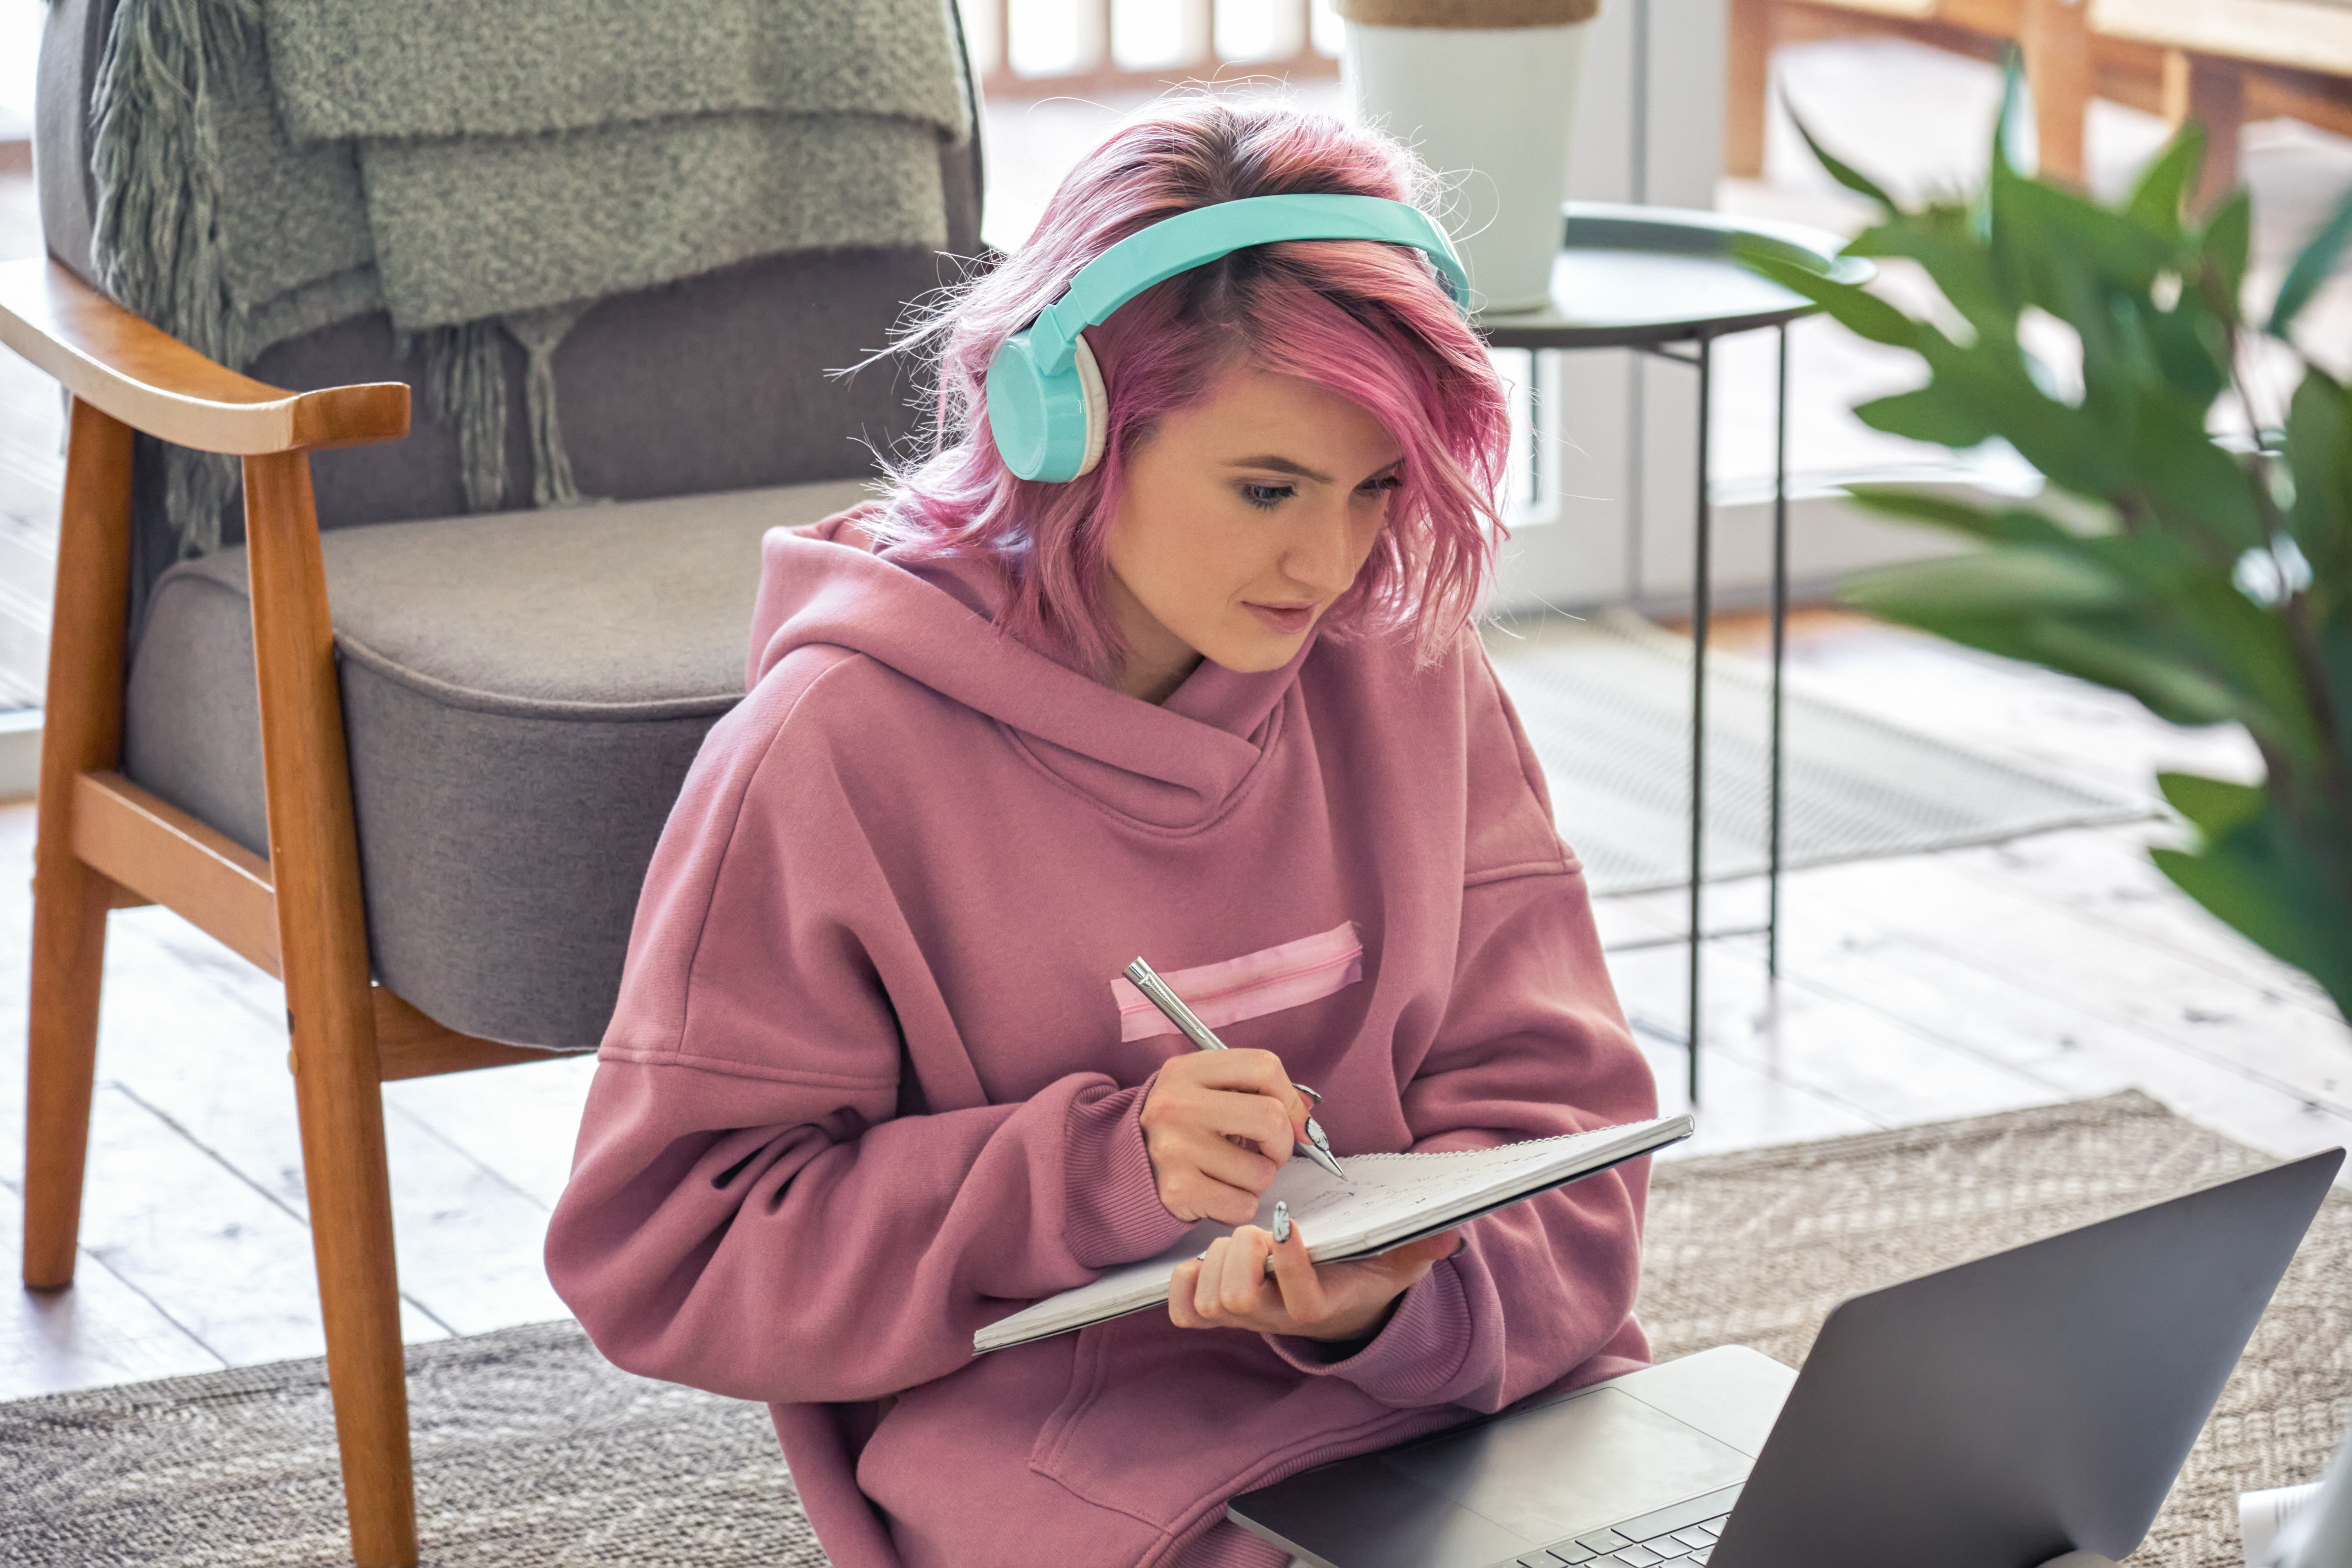 girl with headphones on writing on notepad in front of laptop